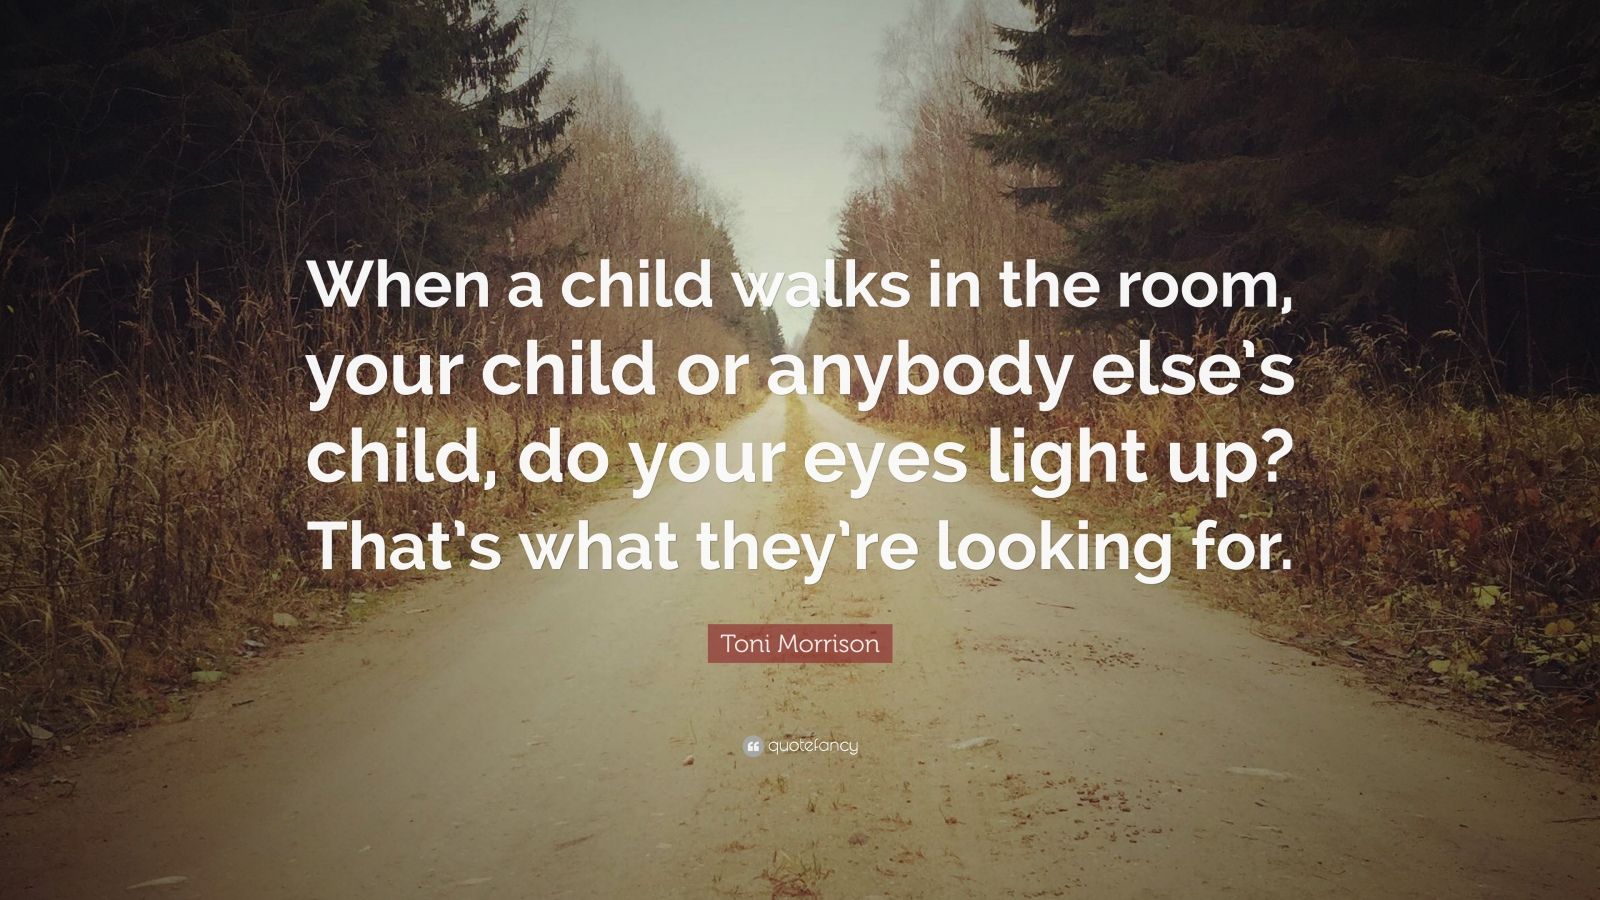 Toni Morrison Quote: “When a child walks in the room, your child or